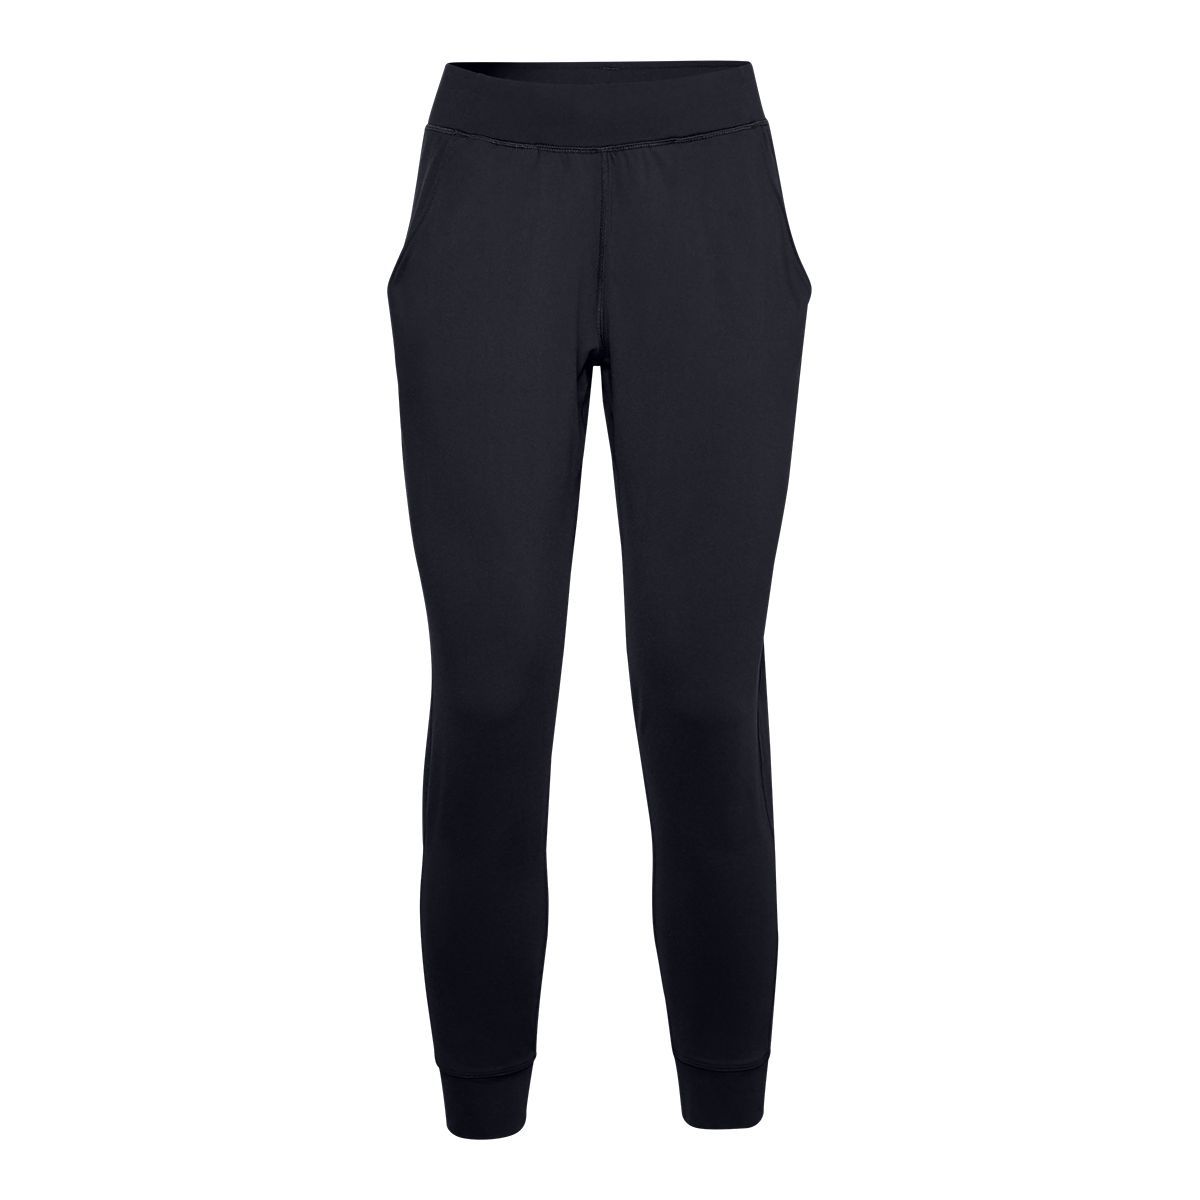 Under Armour Athletic Yoga Pants Womens Small Black Stretchy All Season  Running